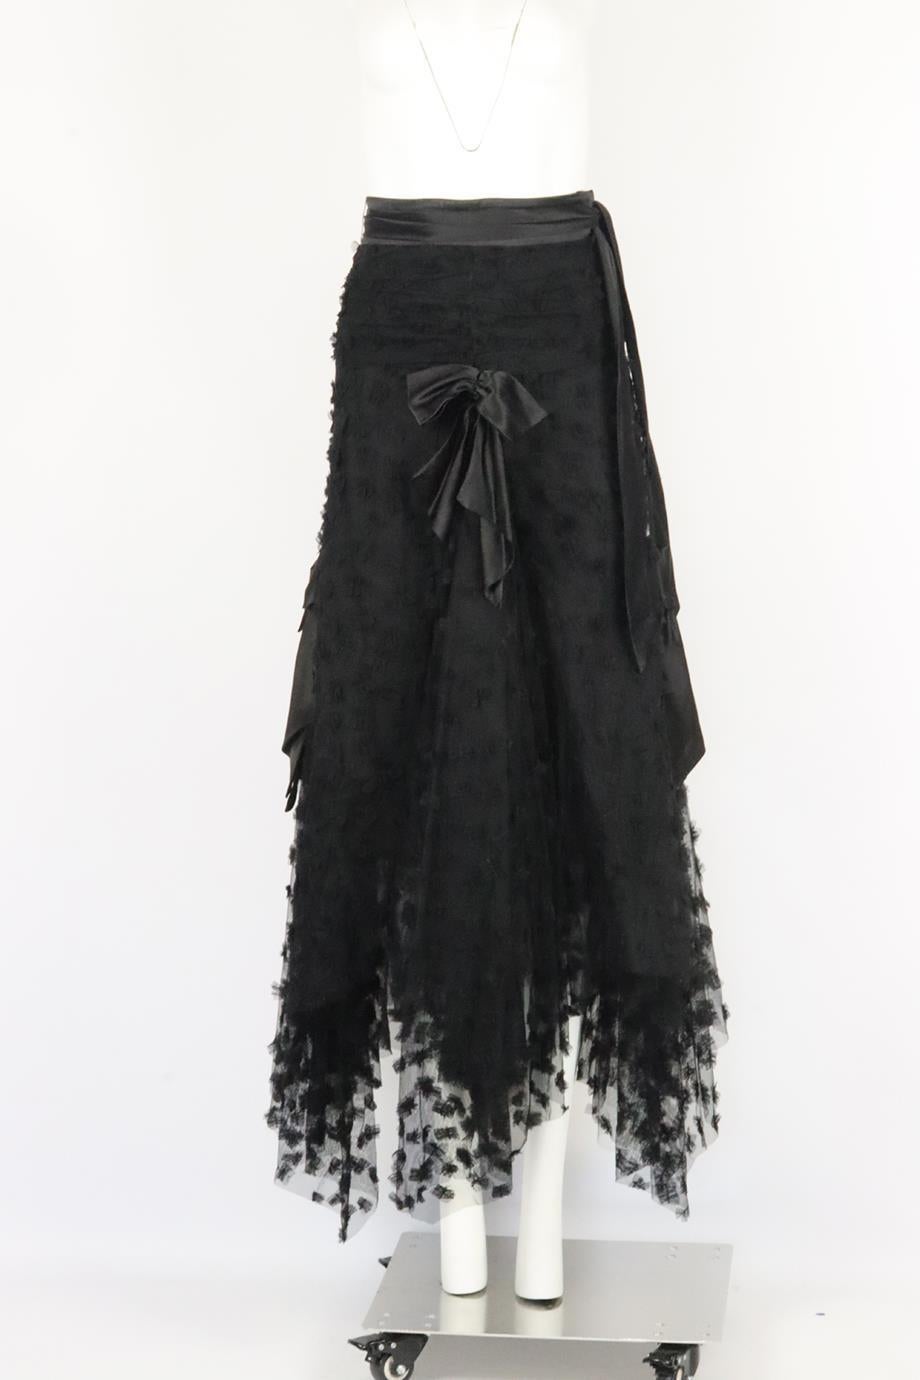 Rodarte bow detailed tulle maxi skirt. Black. Zip fastening at back. 60% Polyamide, 20% nylon, 20% silk; lining 100% silk. Size: Small (UK 8, US 4, FR 36, IT 40). Waist: 25.4 in. Hips: 44 in. Length: 43 in. Bow has come away, needs to be reattached;